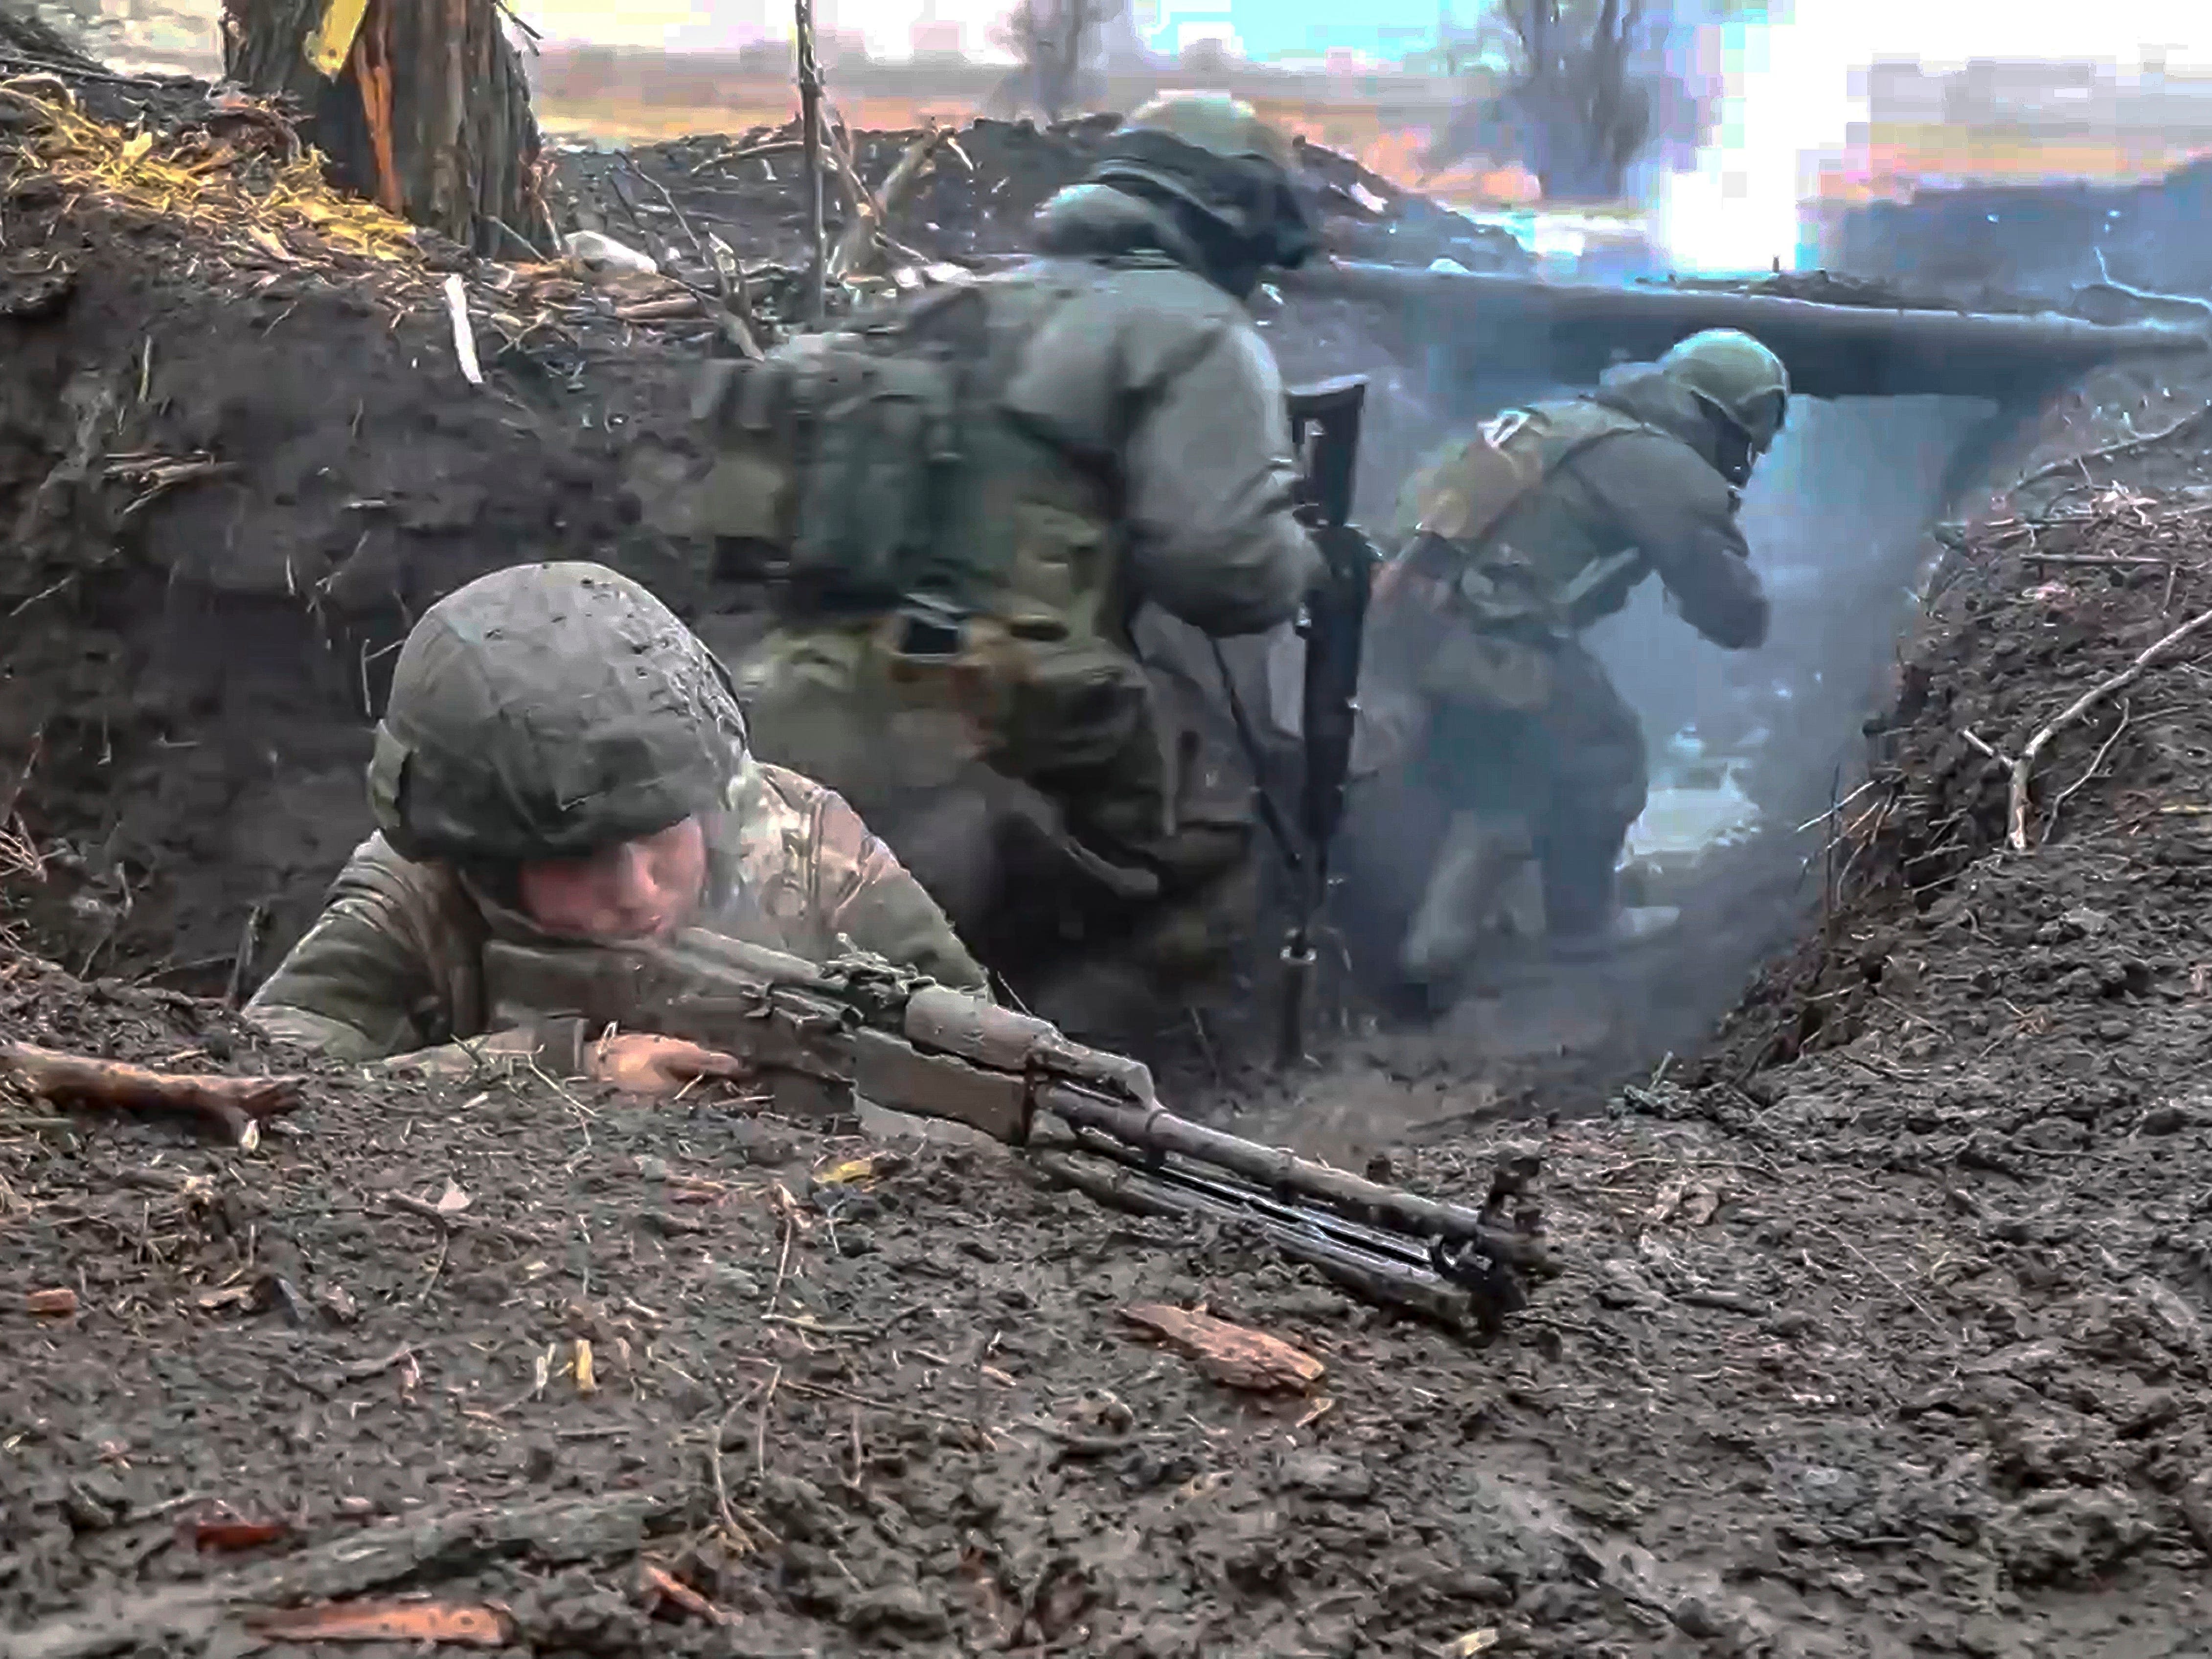 Russia is finally getting serious about its war, and it spells trouble for Ukraine